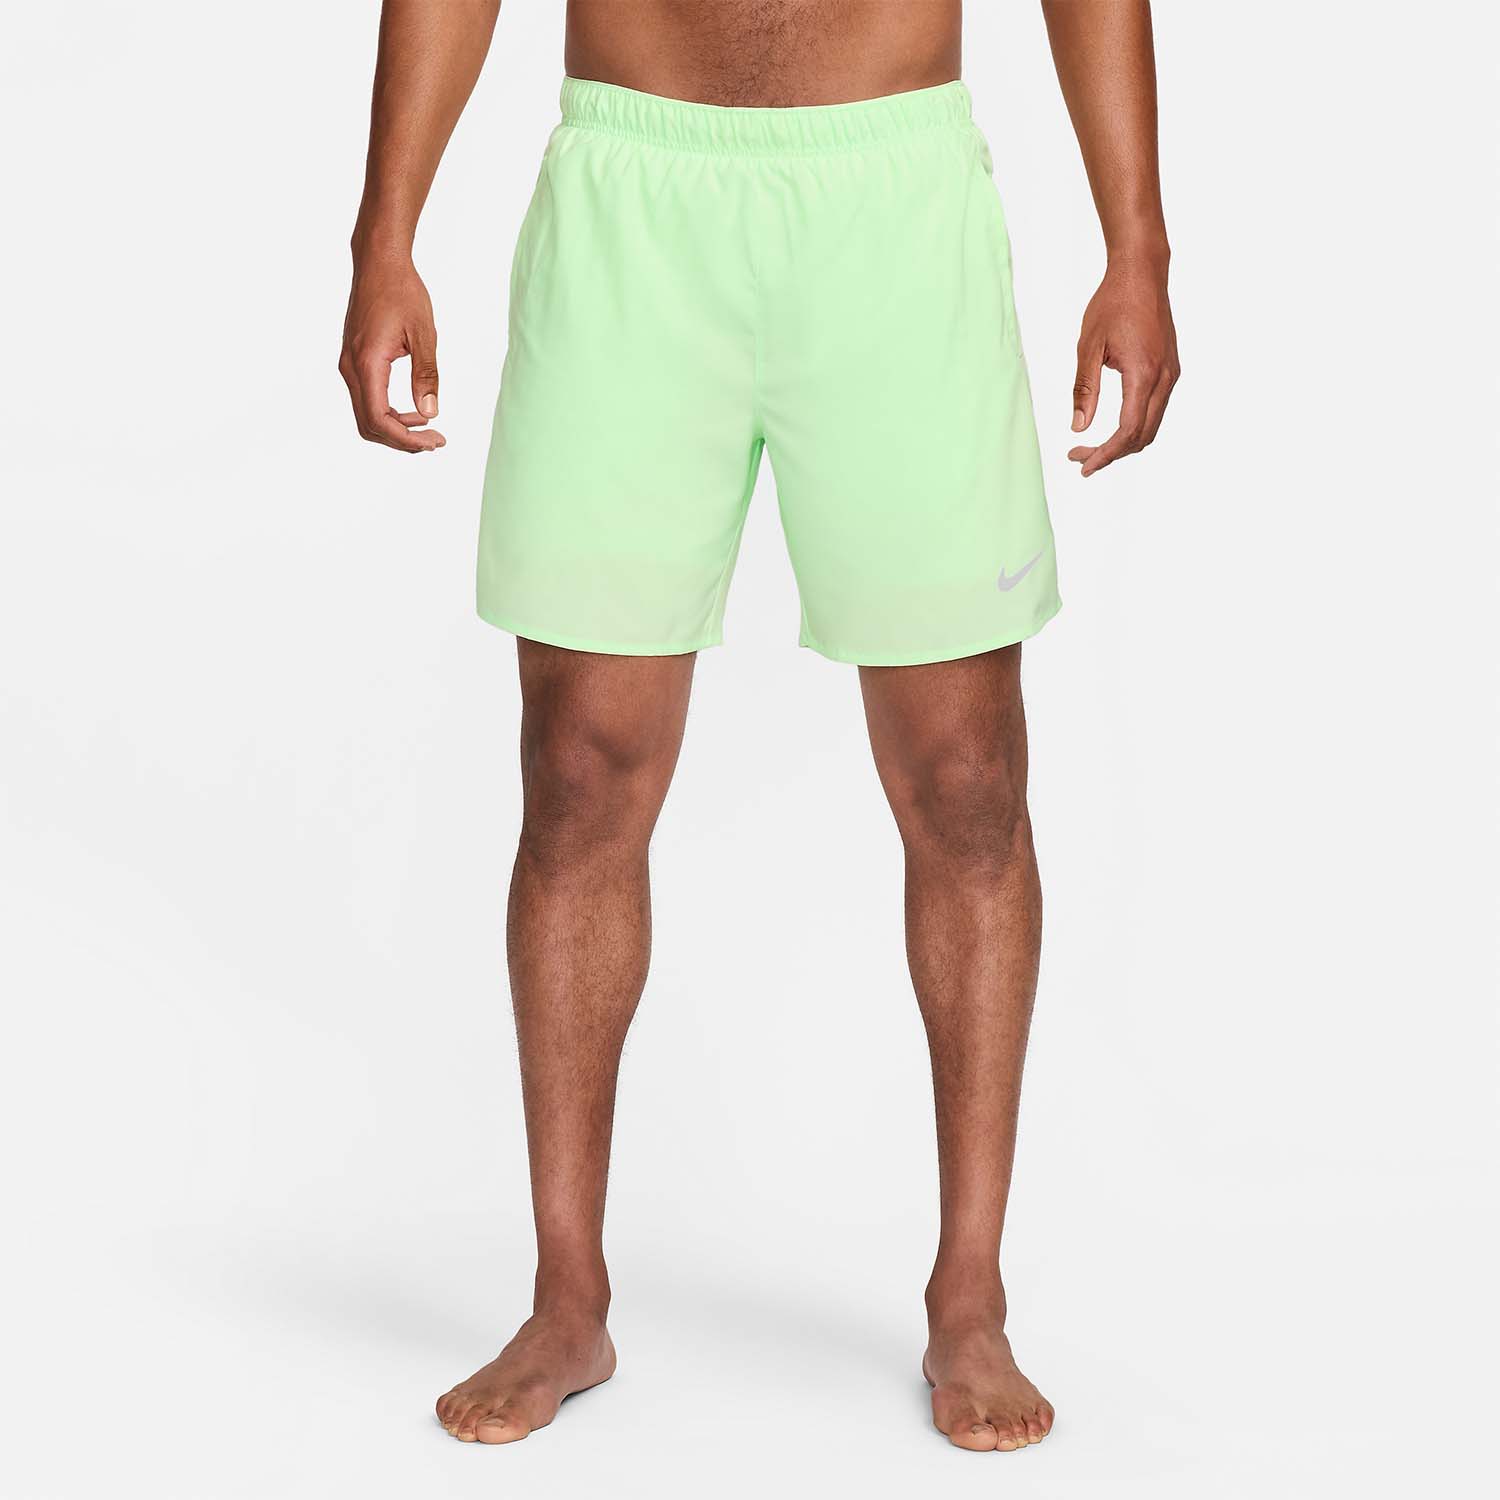 Nike Challenger 2 in 1 7in Shorts - Vapor Green/Reflective Silver